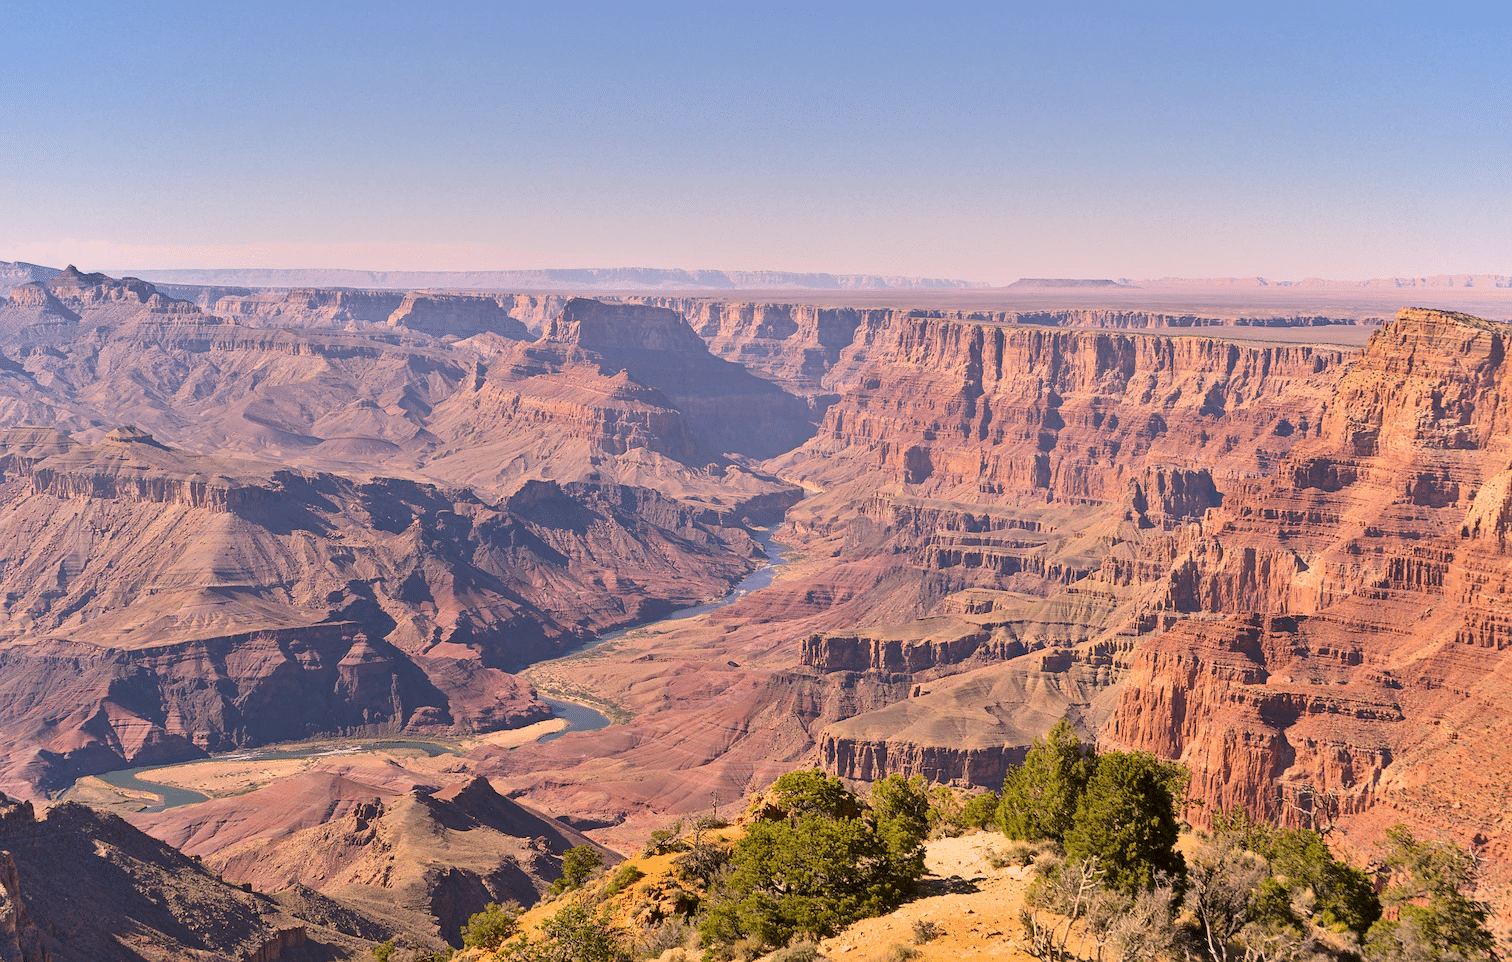 View of the Grand Canyon National Park